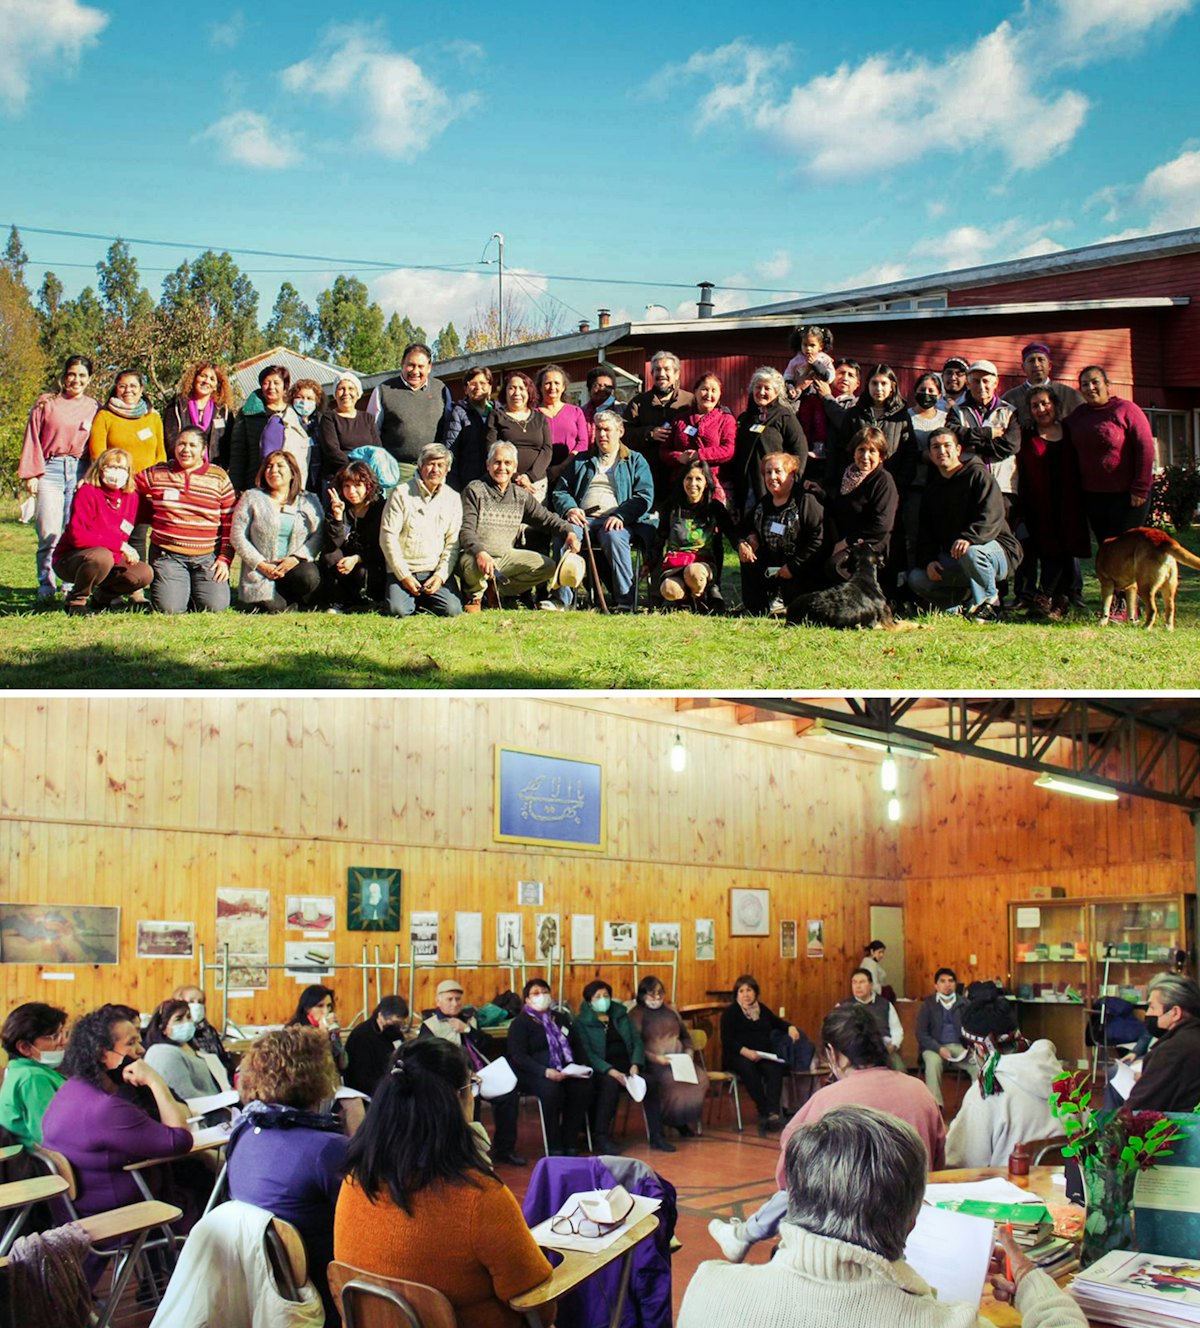 Pictured here is the first conference in the southern region of Chile, held in the city of Labranza.